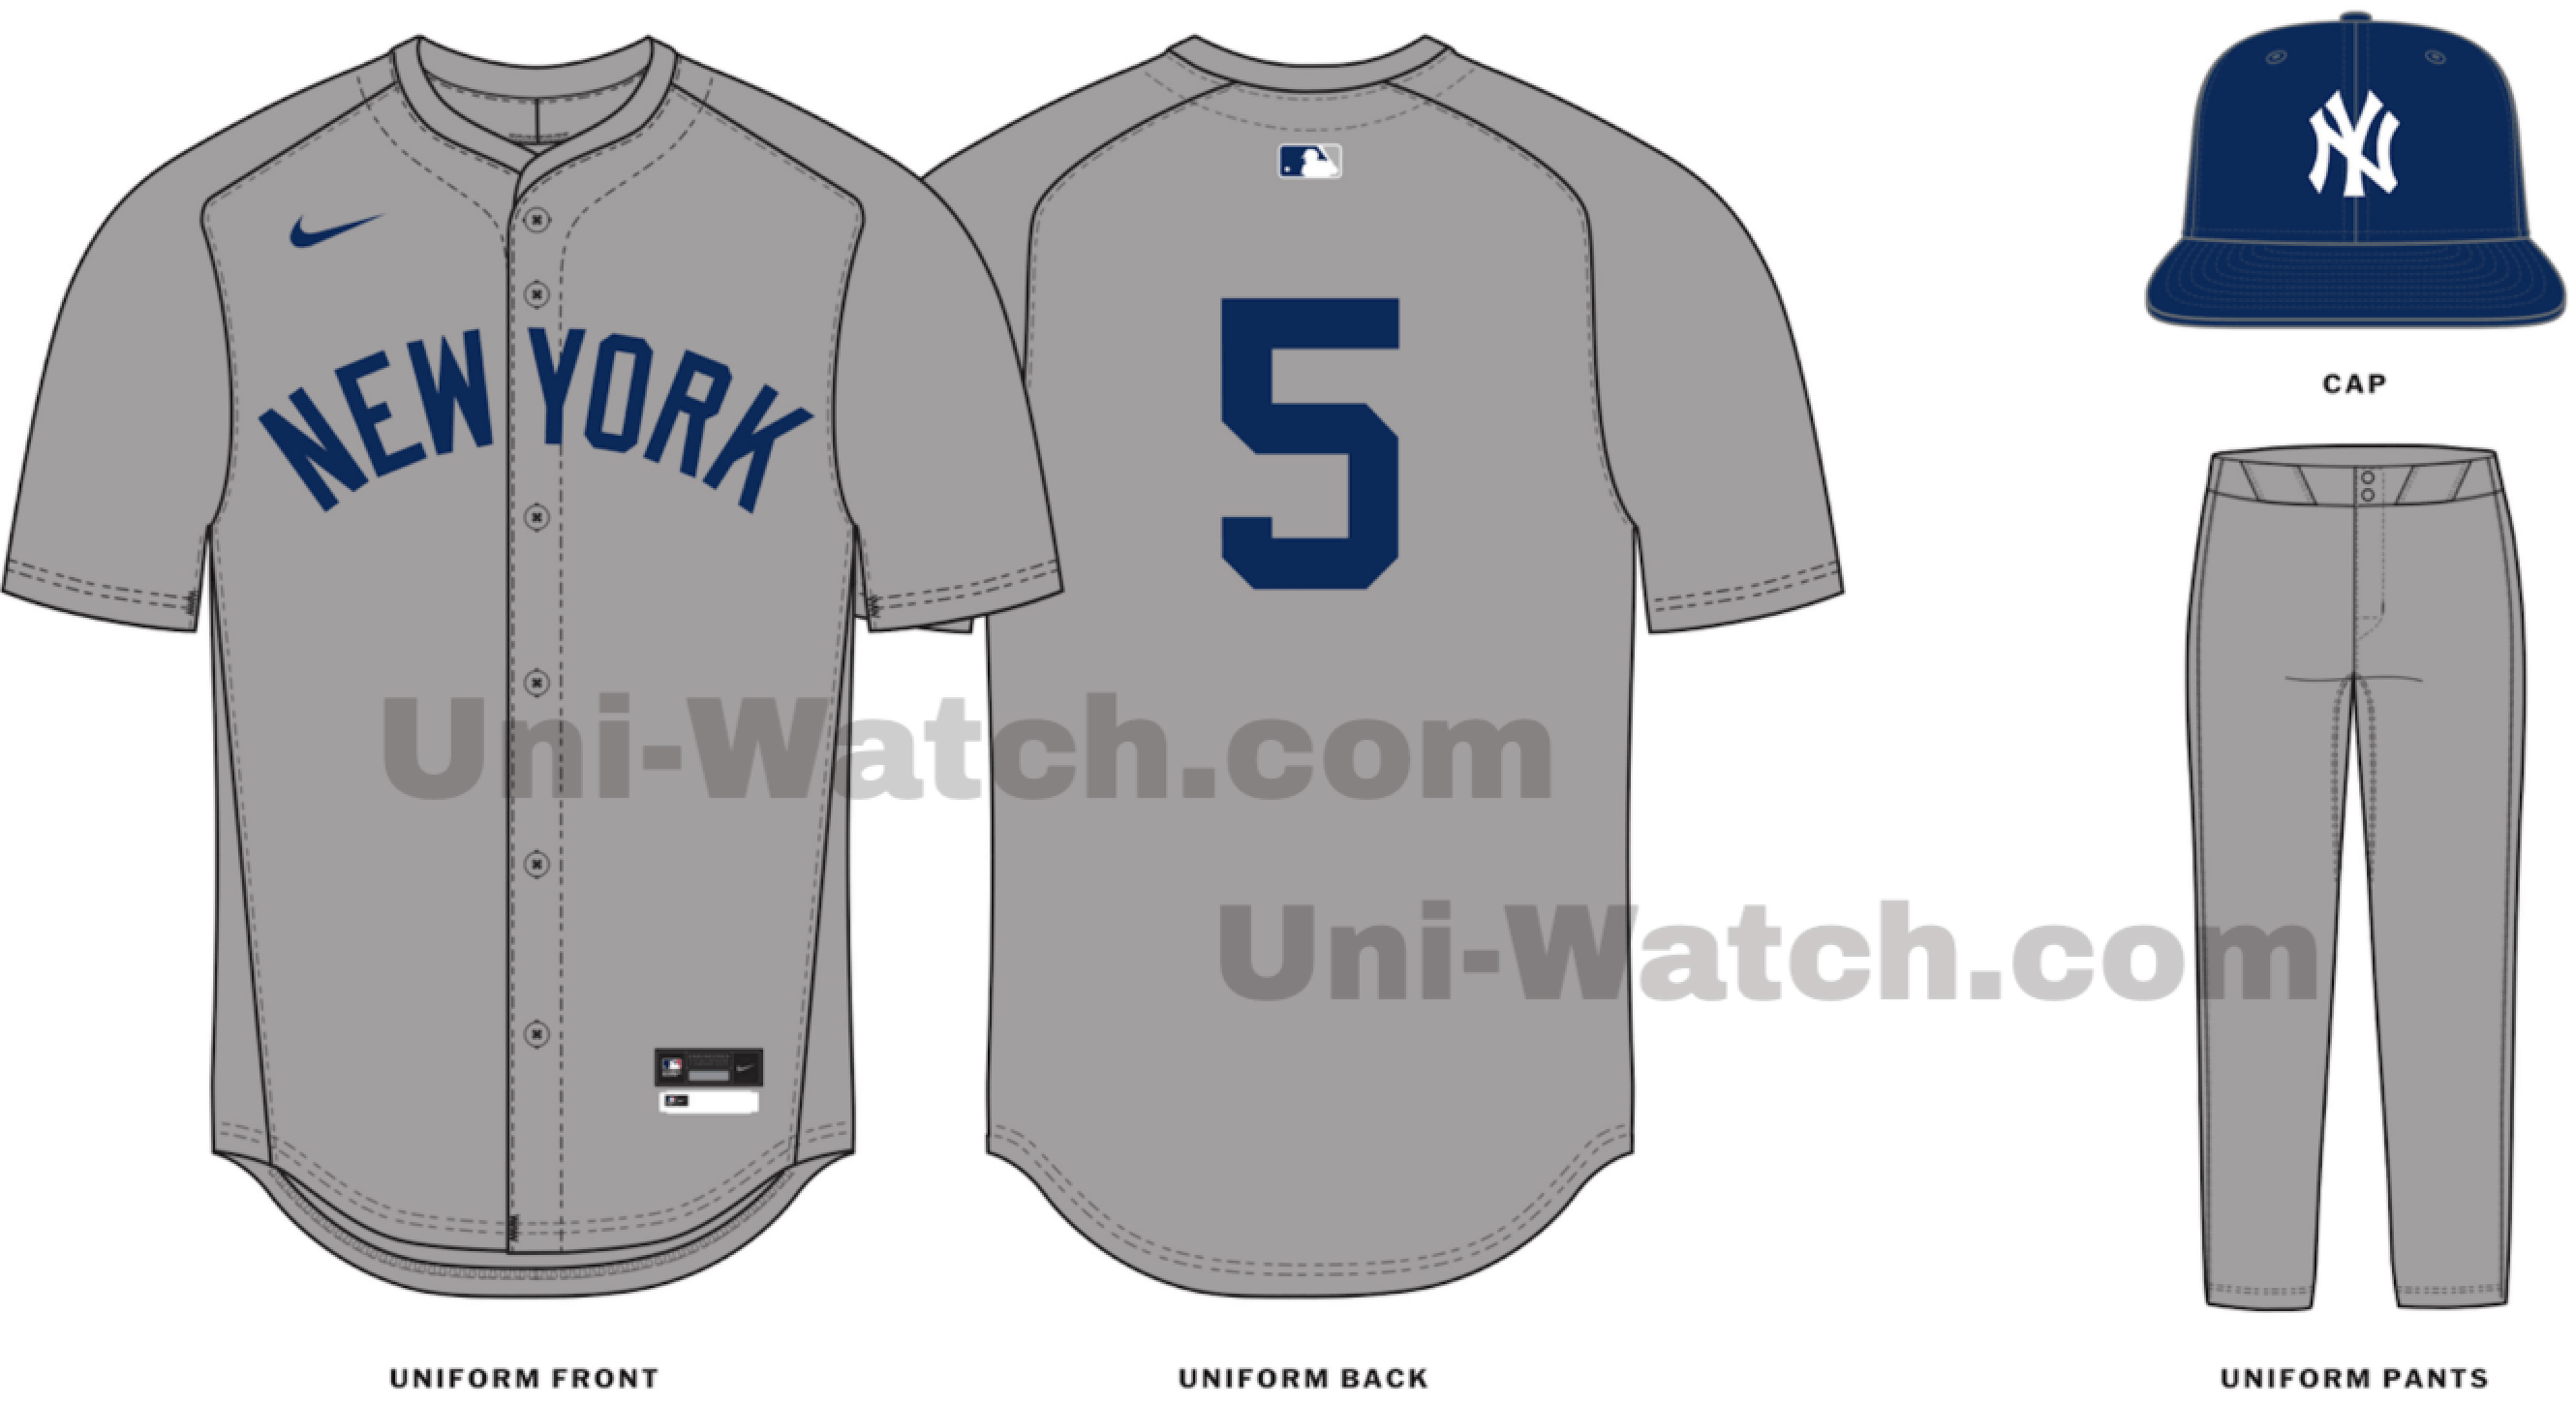 BREAKING: Yankees Are Making Change To Road Uniforms